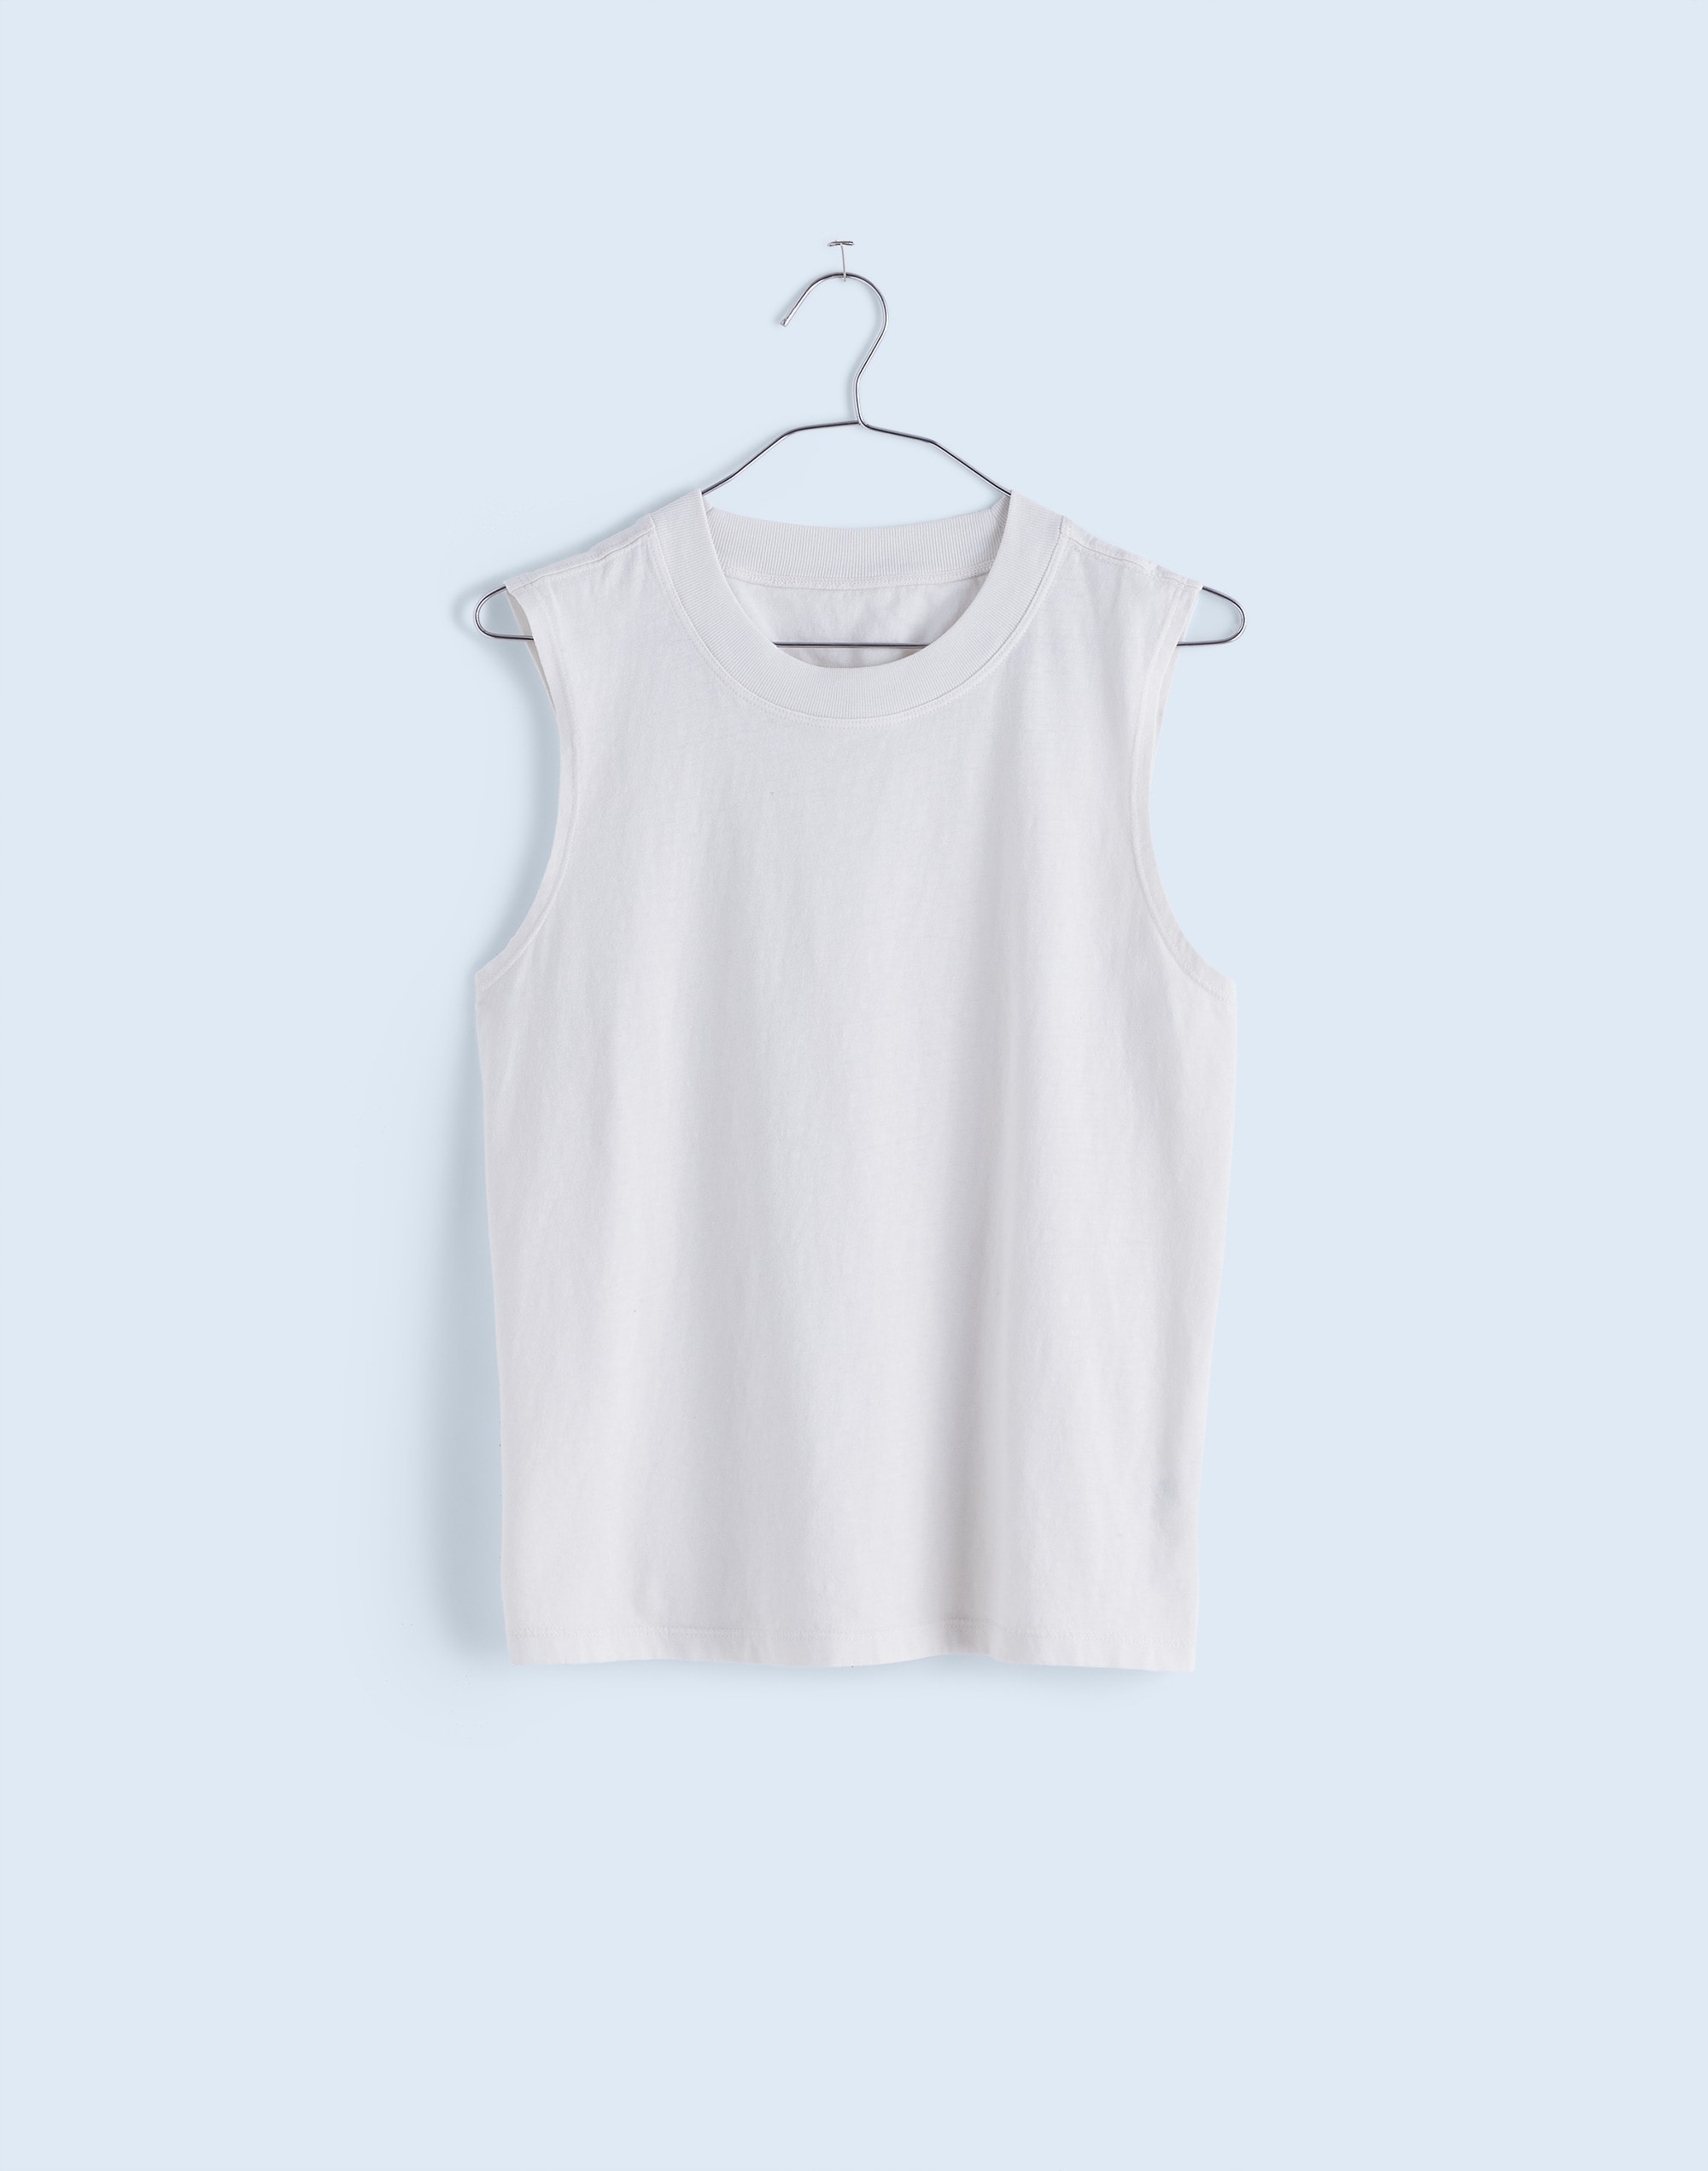 Mw Premium Standard 03. The Muscle Tank In Eyelet White